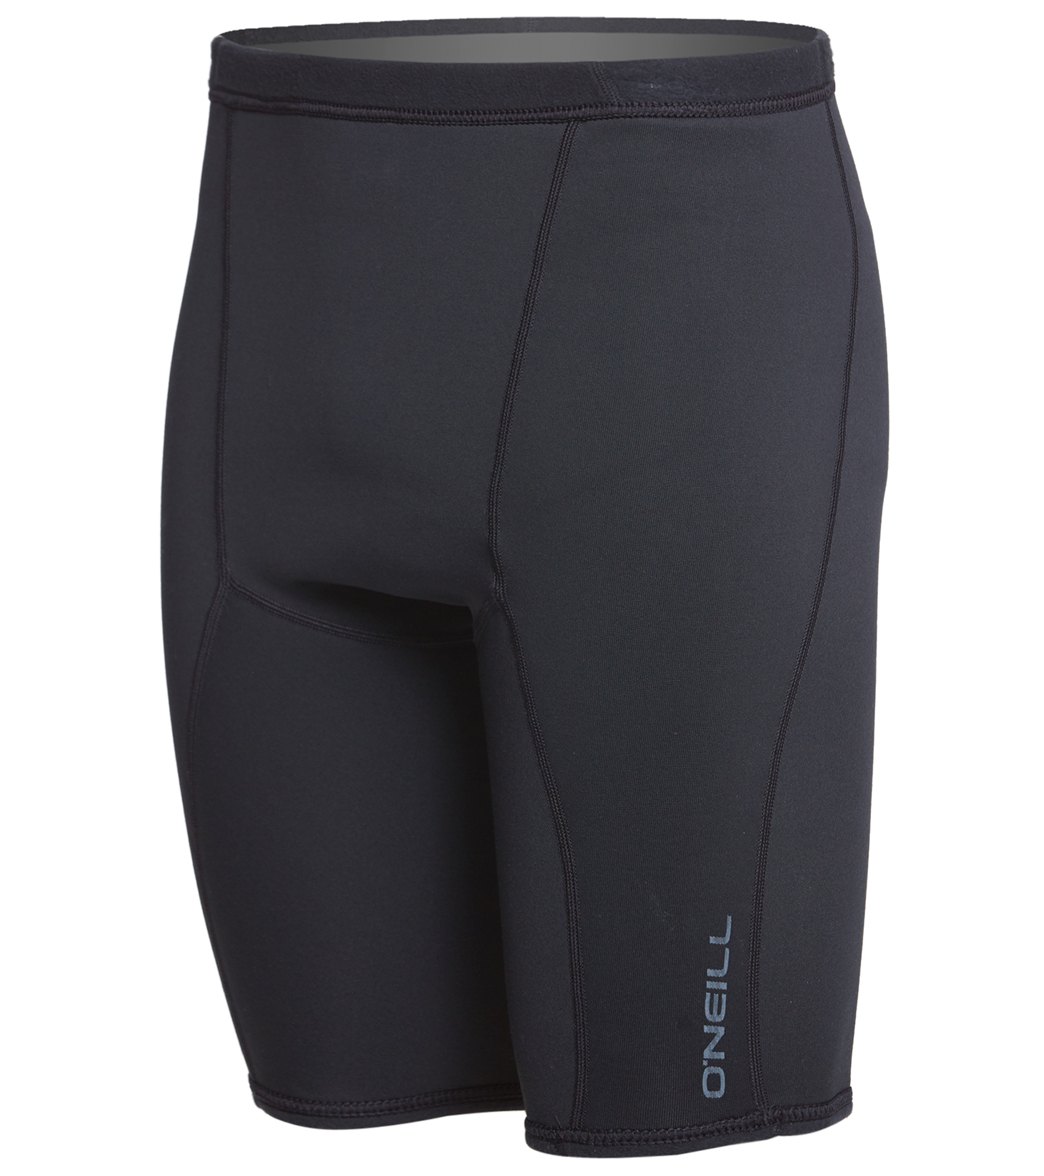 O'Neill Men's Thermo-X Insulating Short at SwimOutlet.com - Free Shipping